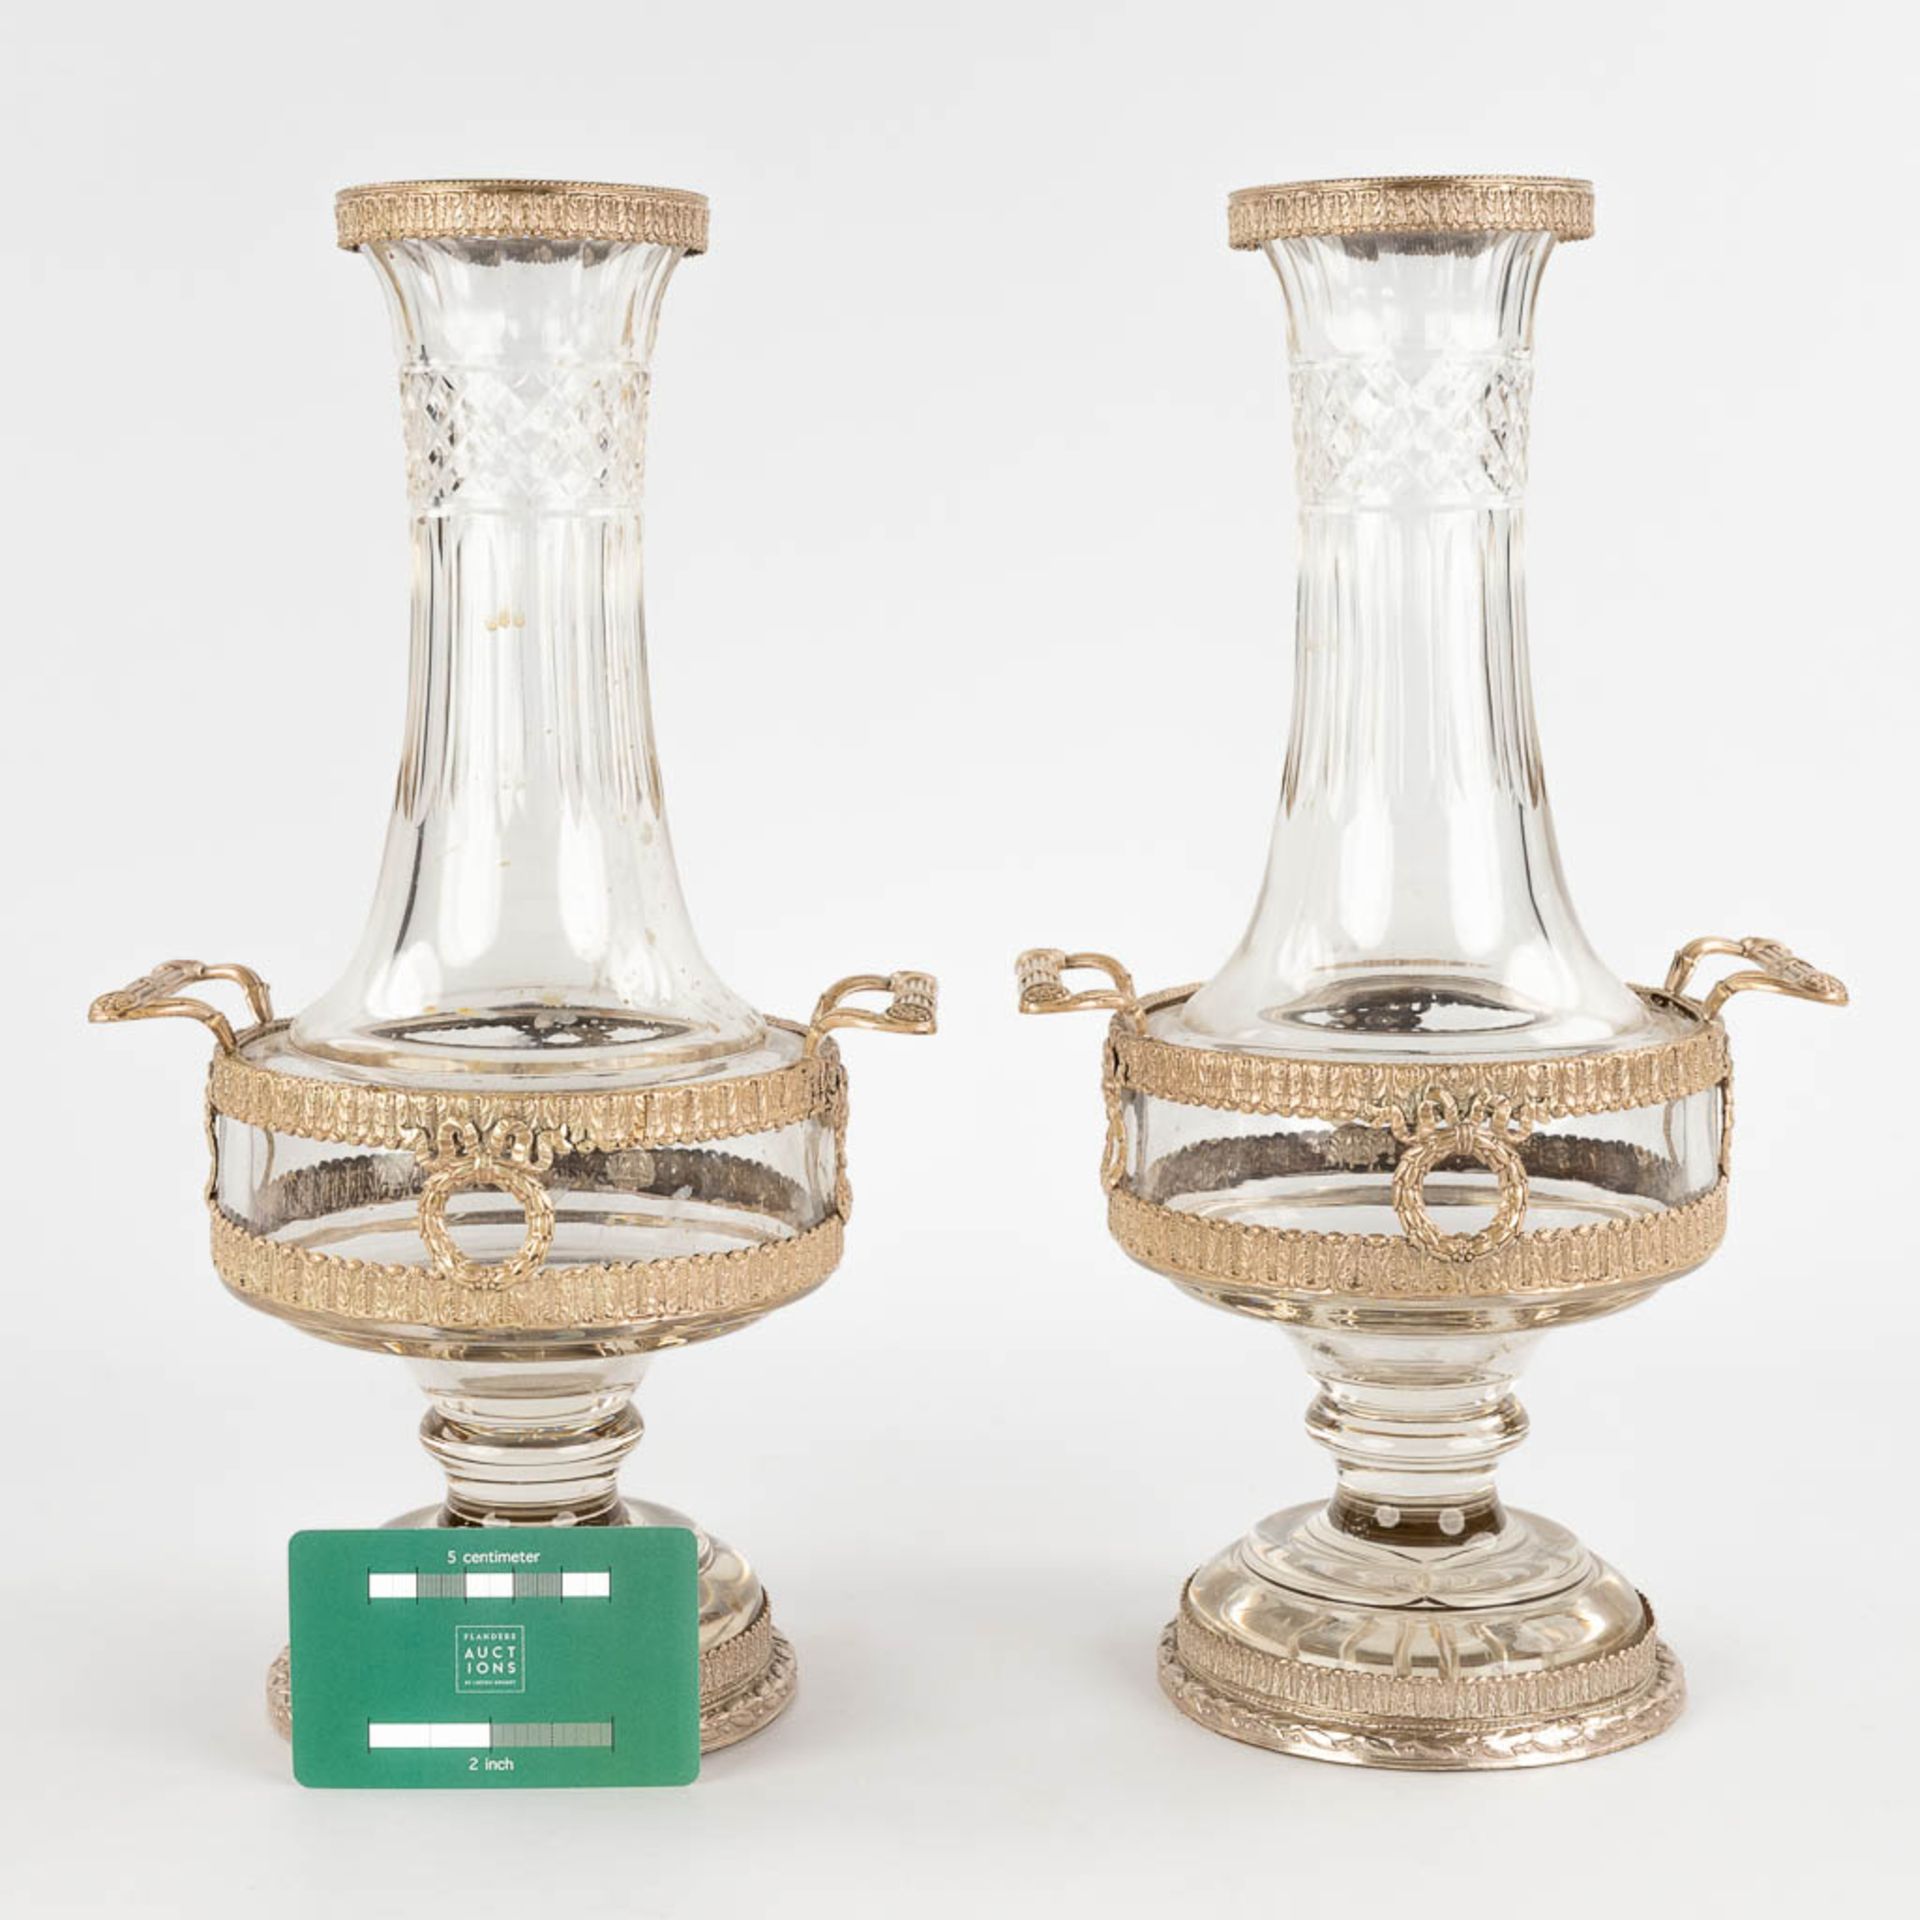 A pair of decorative vases, silver-plated bronze on glass, Neoclassical. 20th C. (D:14 x W:18 x H:33 - Bild 2 aus 16